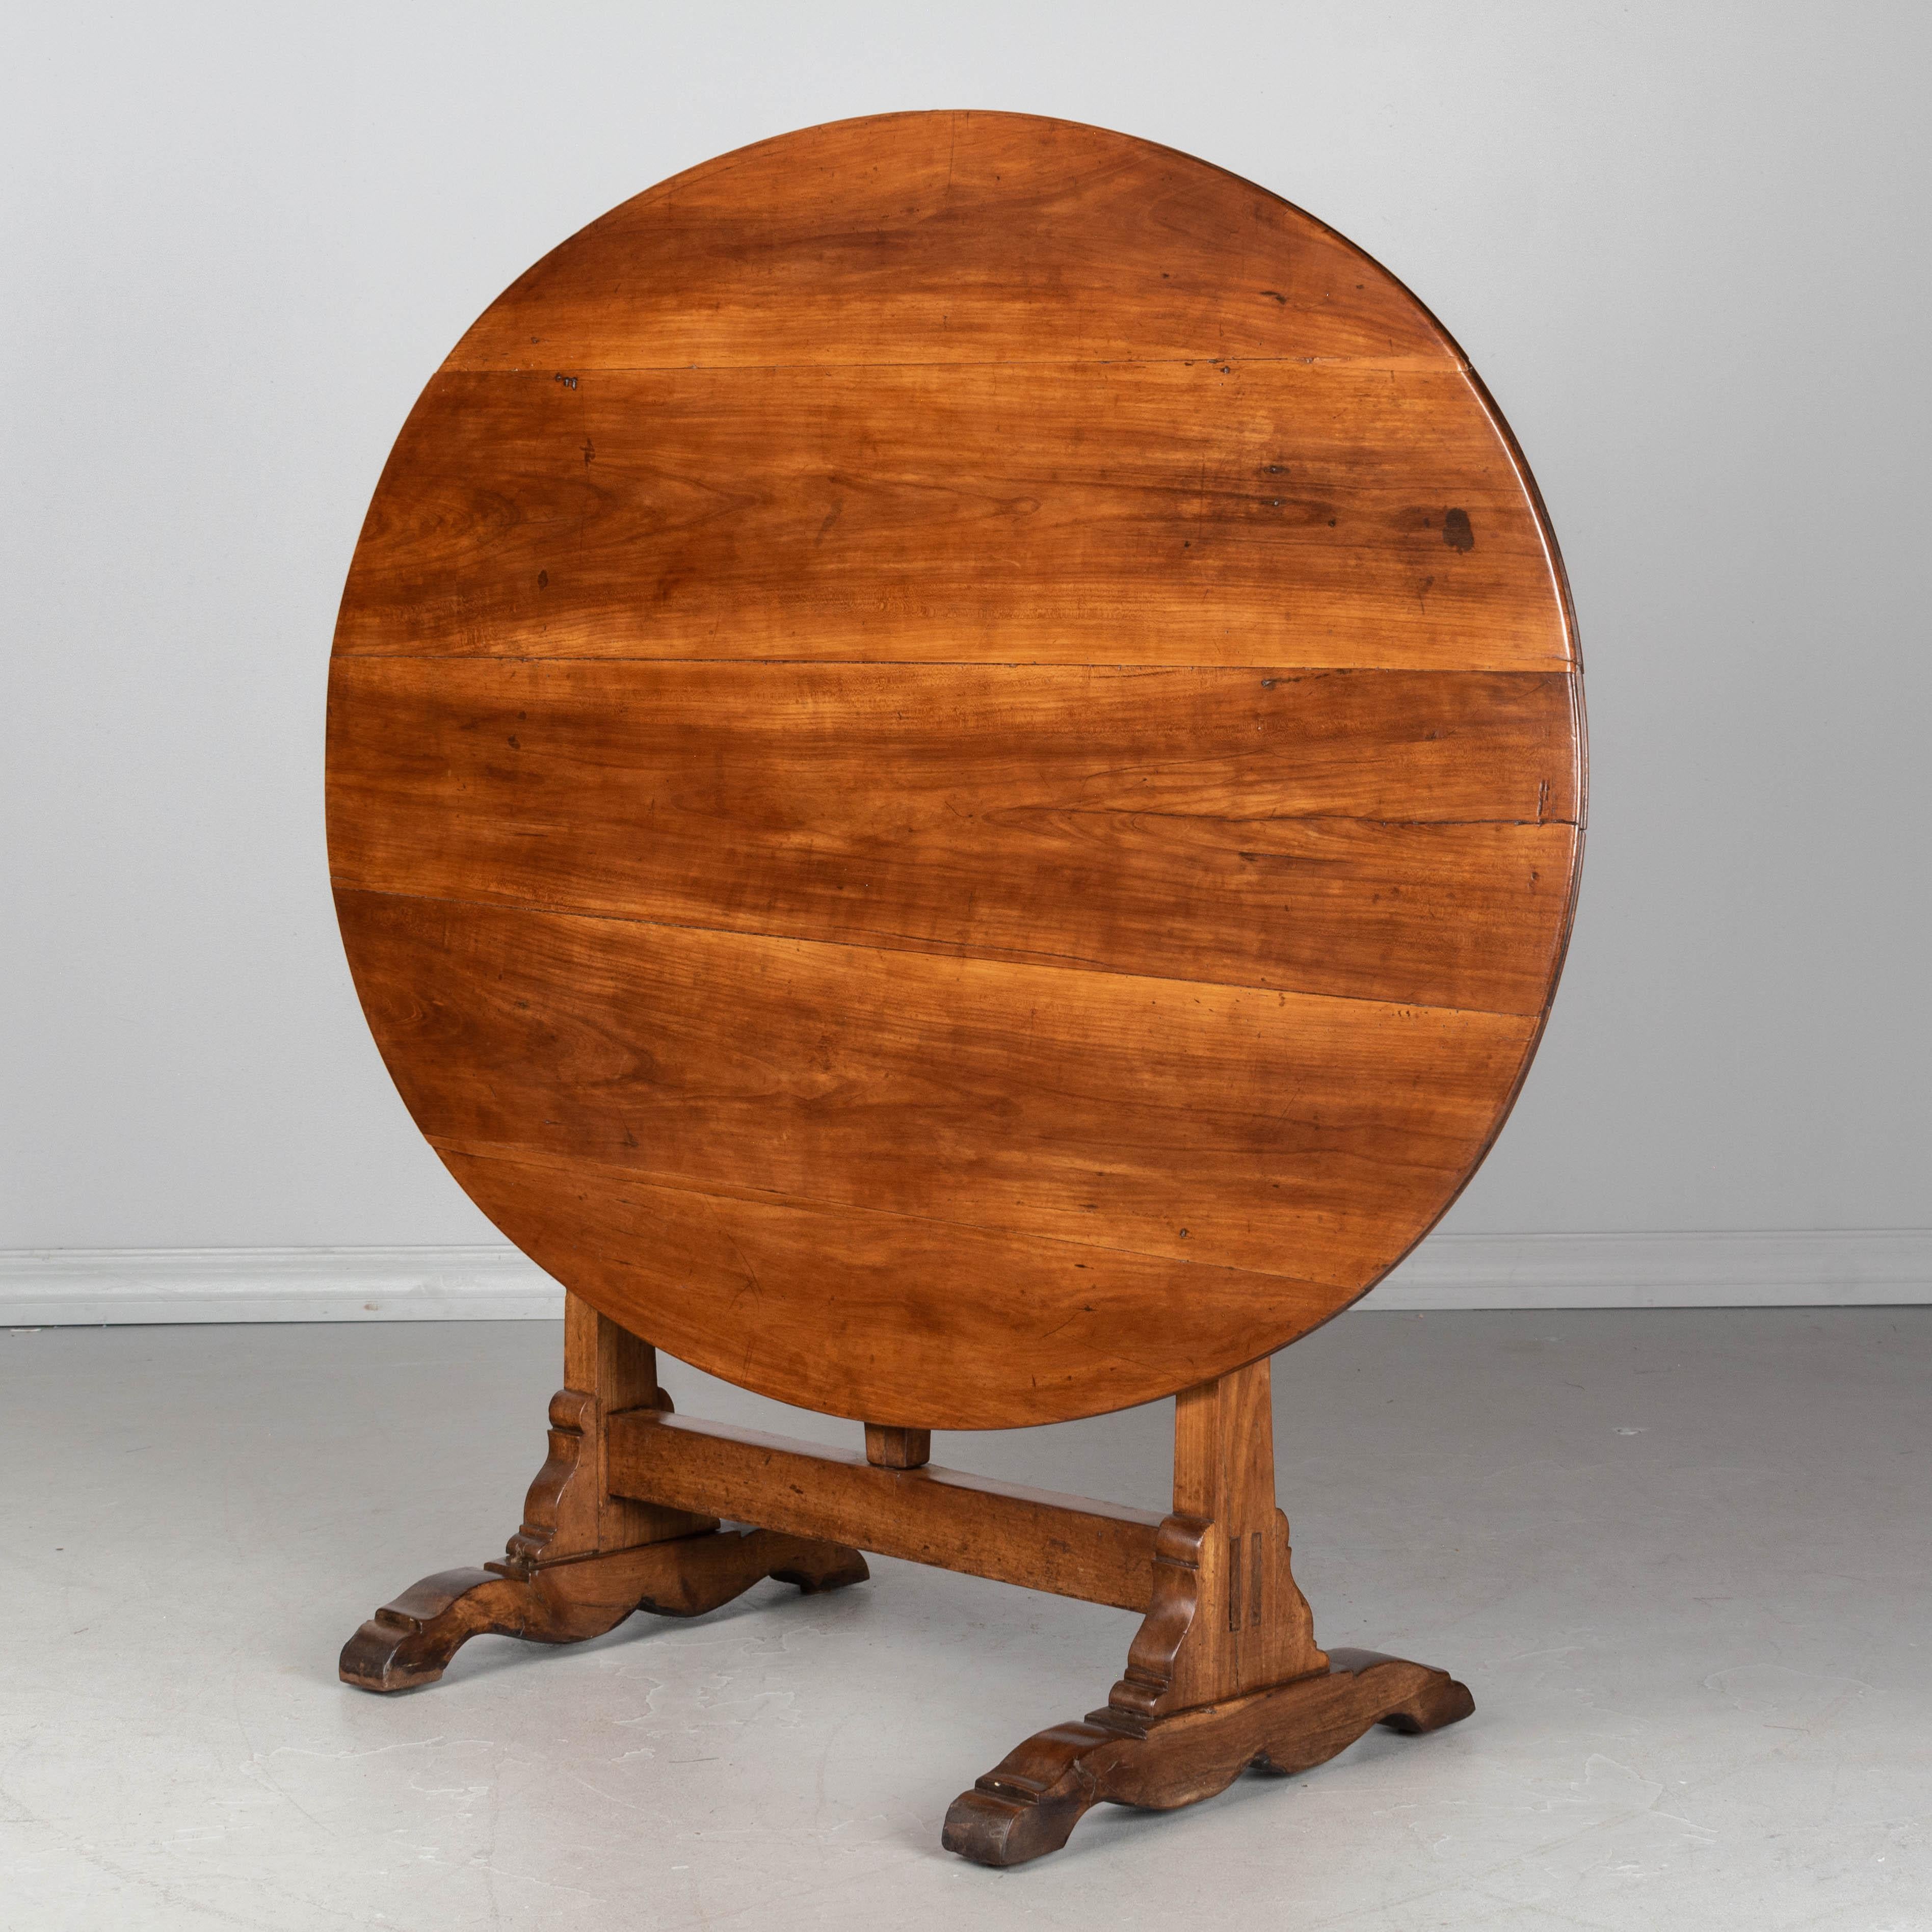 A French wine tasting, or tilt-top table, made of solid cherrywood. Oval top with sturdy trestle base. Legs have nice decorative form. Well-crafted with mortise and tenon joints and pegged construction. Good restored condition. Waxed